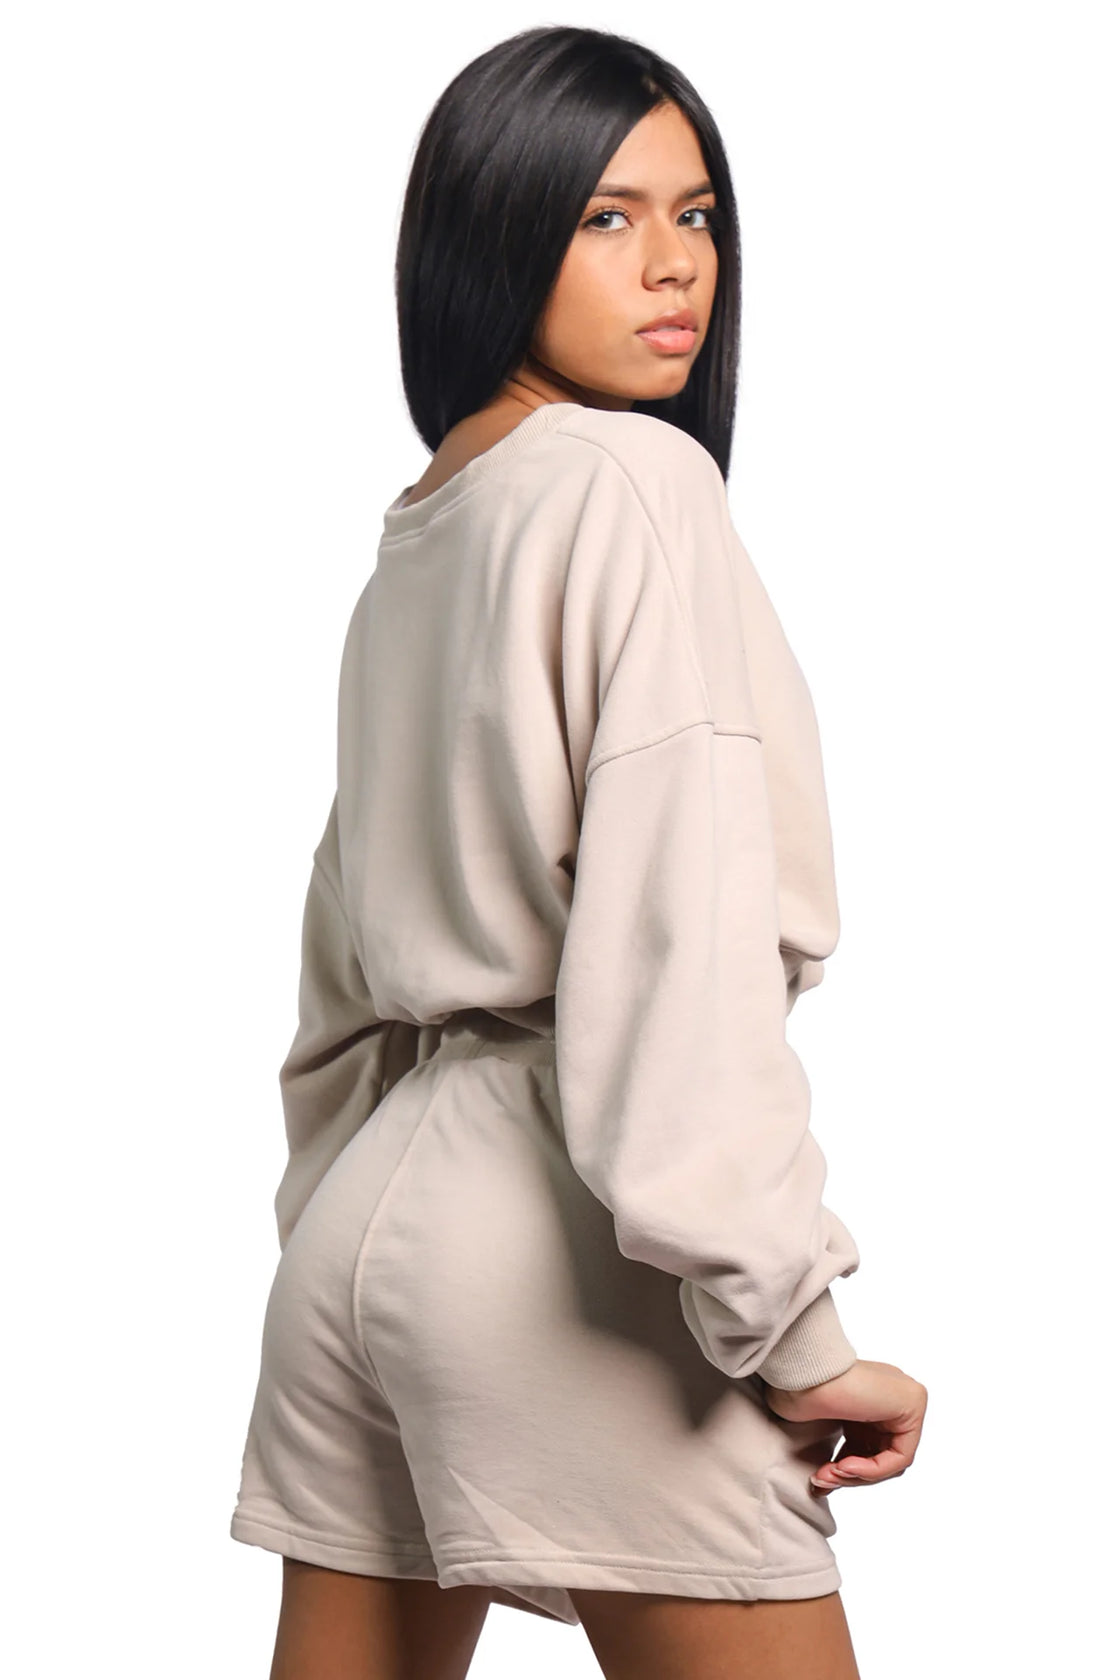 Oversize tan pullover